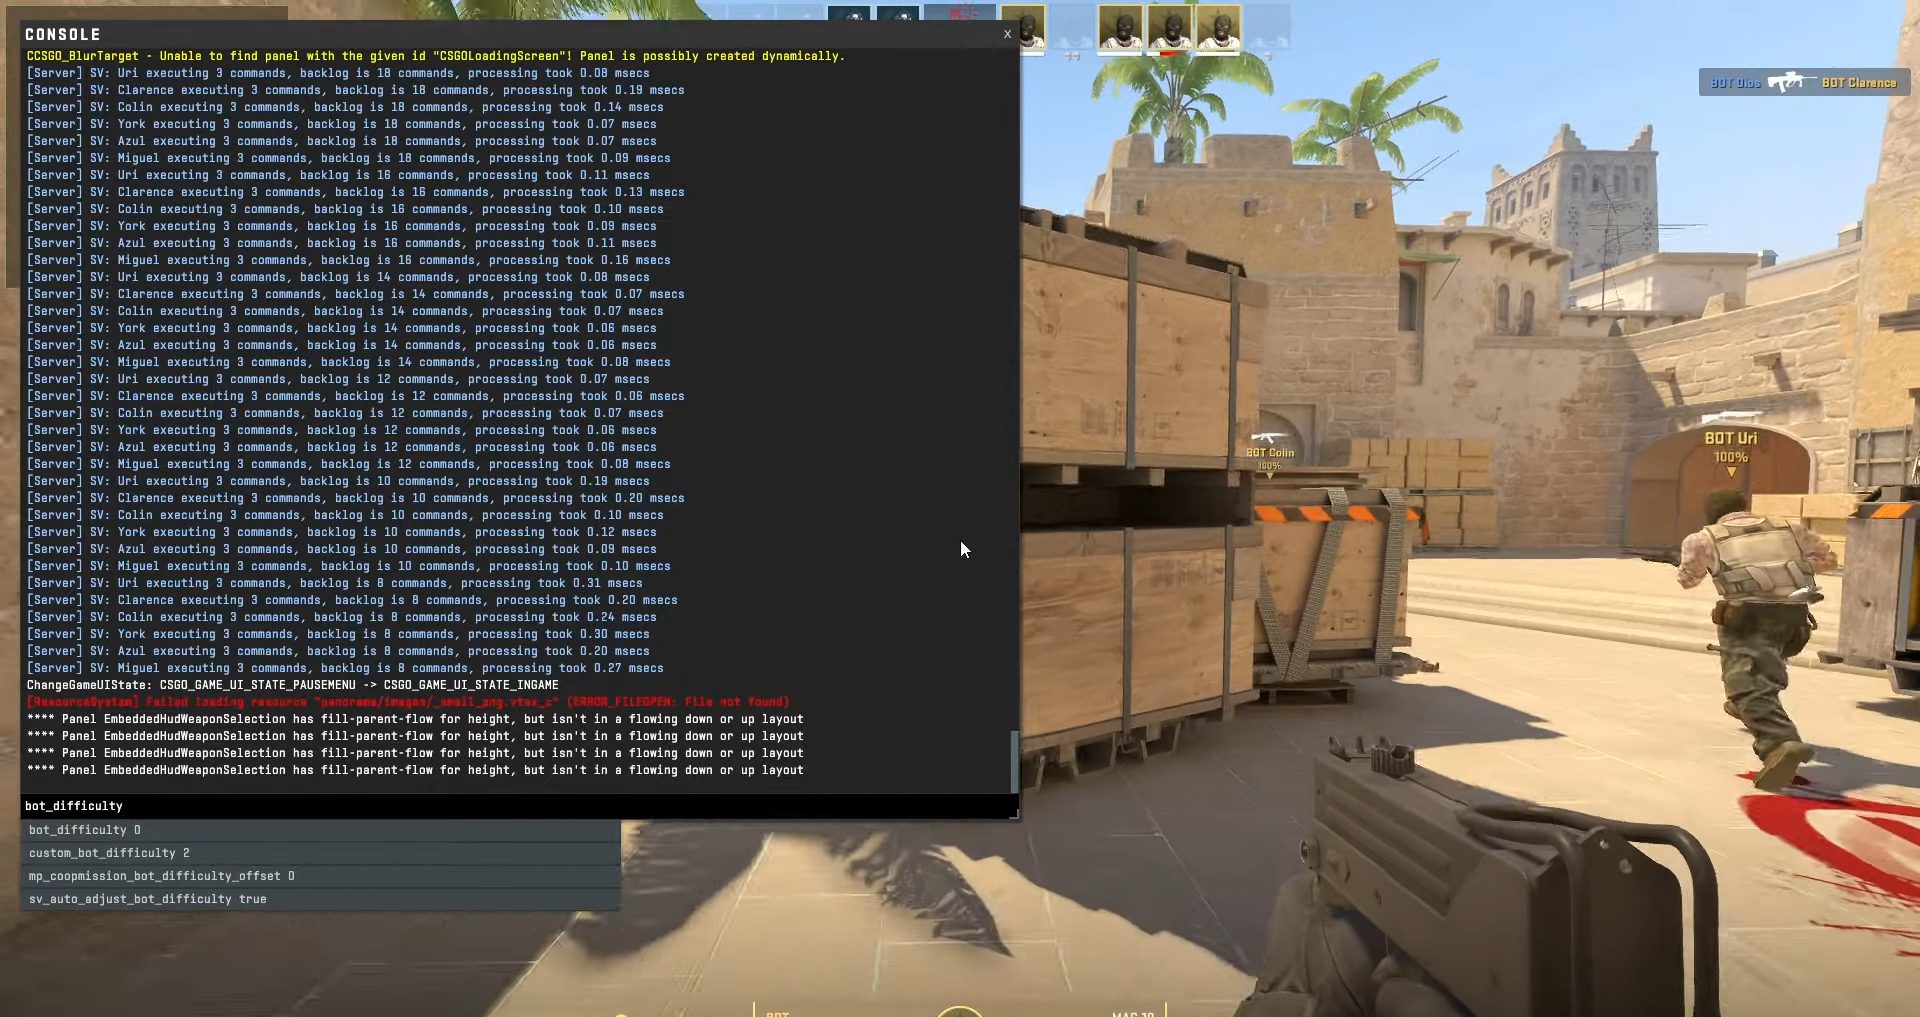 How to change bot difficulty in Counter-Strike 2